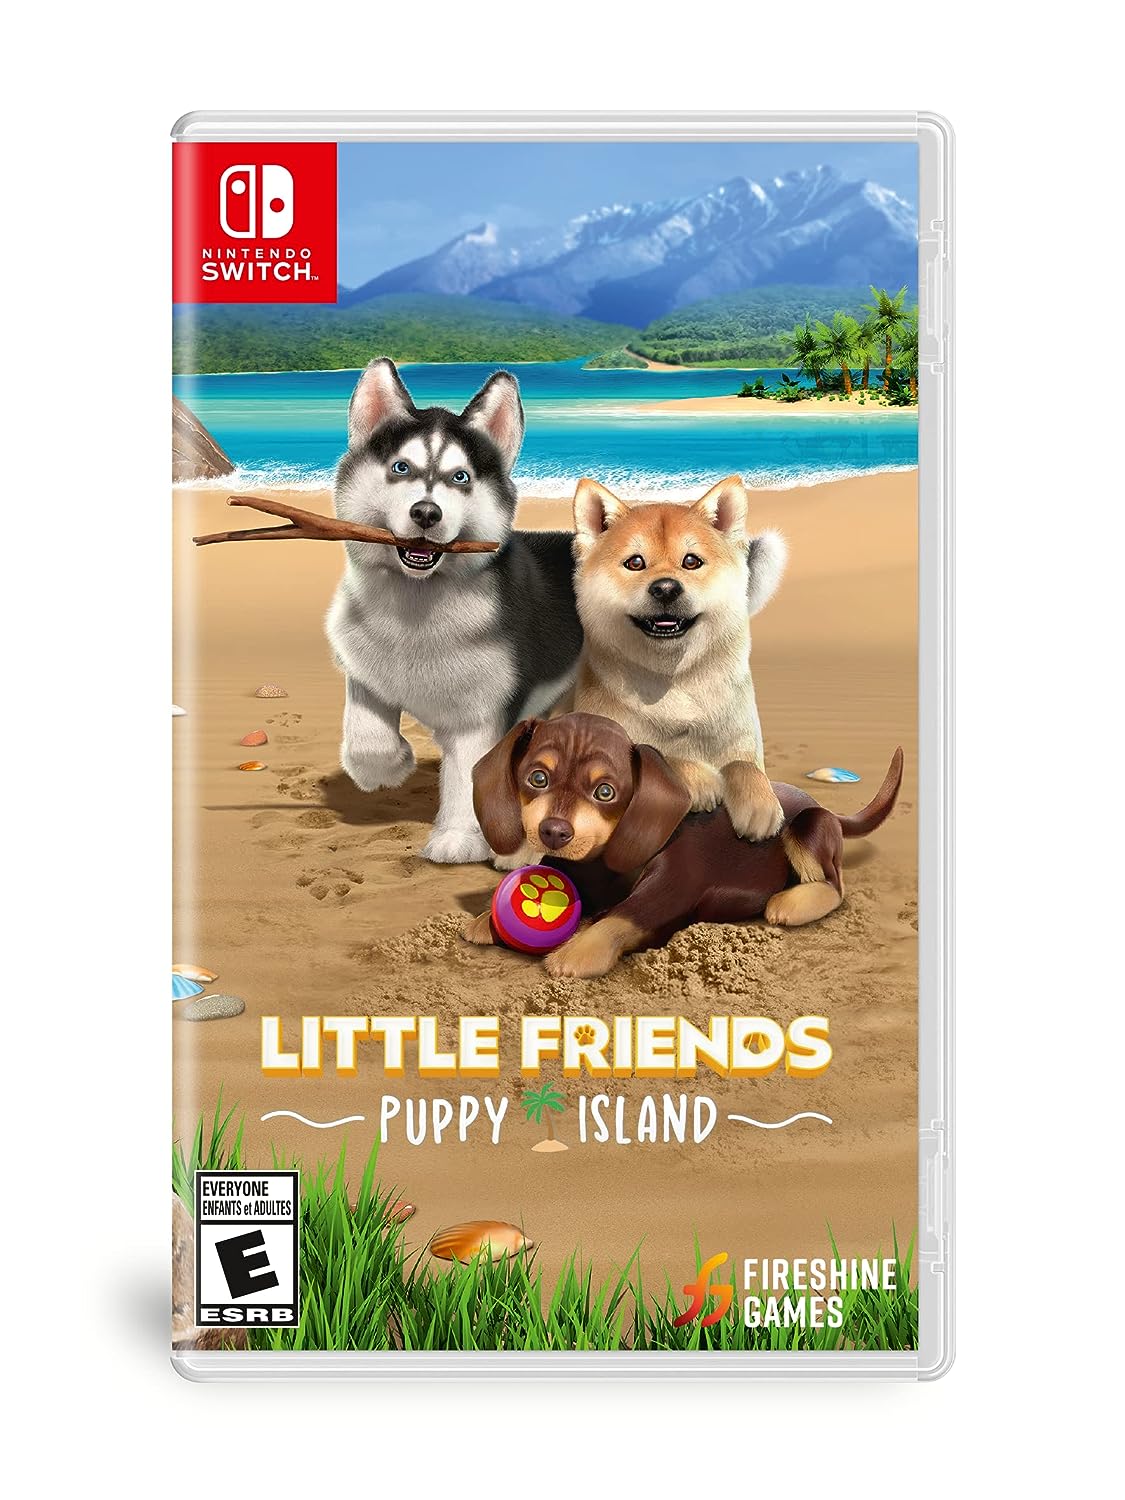 Puppy Paradise Awaits: Why 'Little Friends: Puppy Island' is the Ultimate Holiday Gift for Families 29